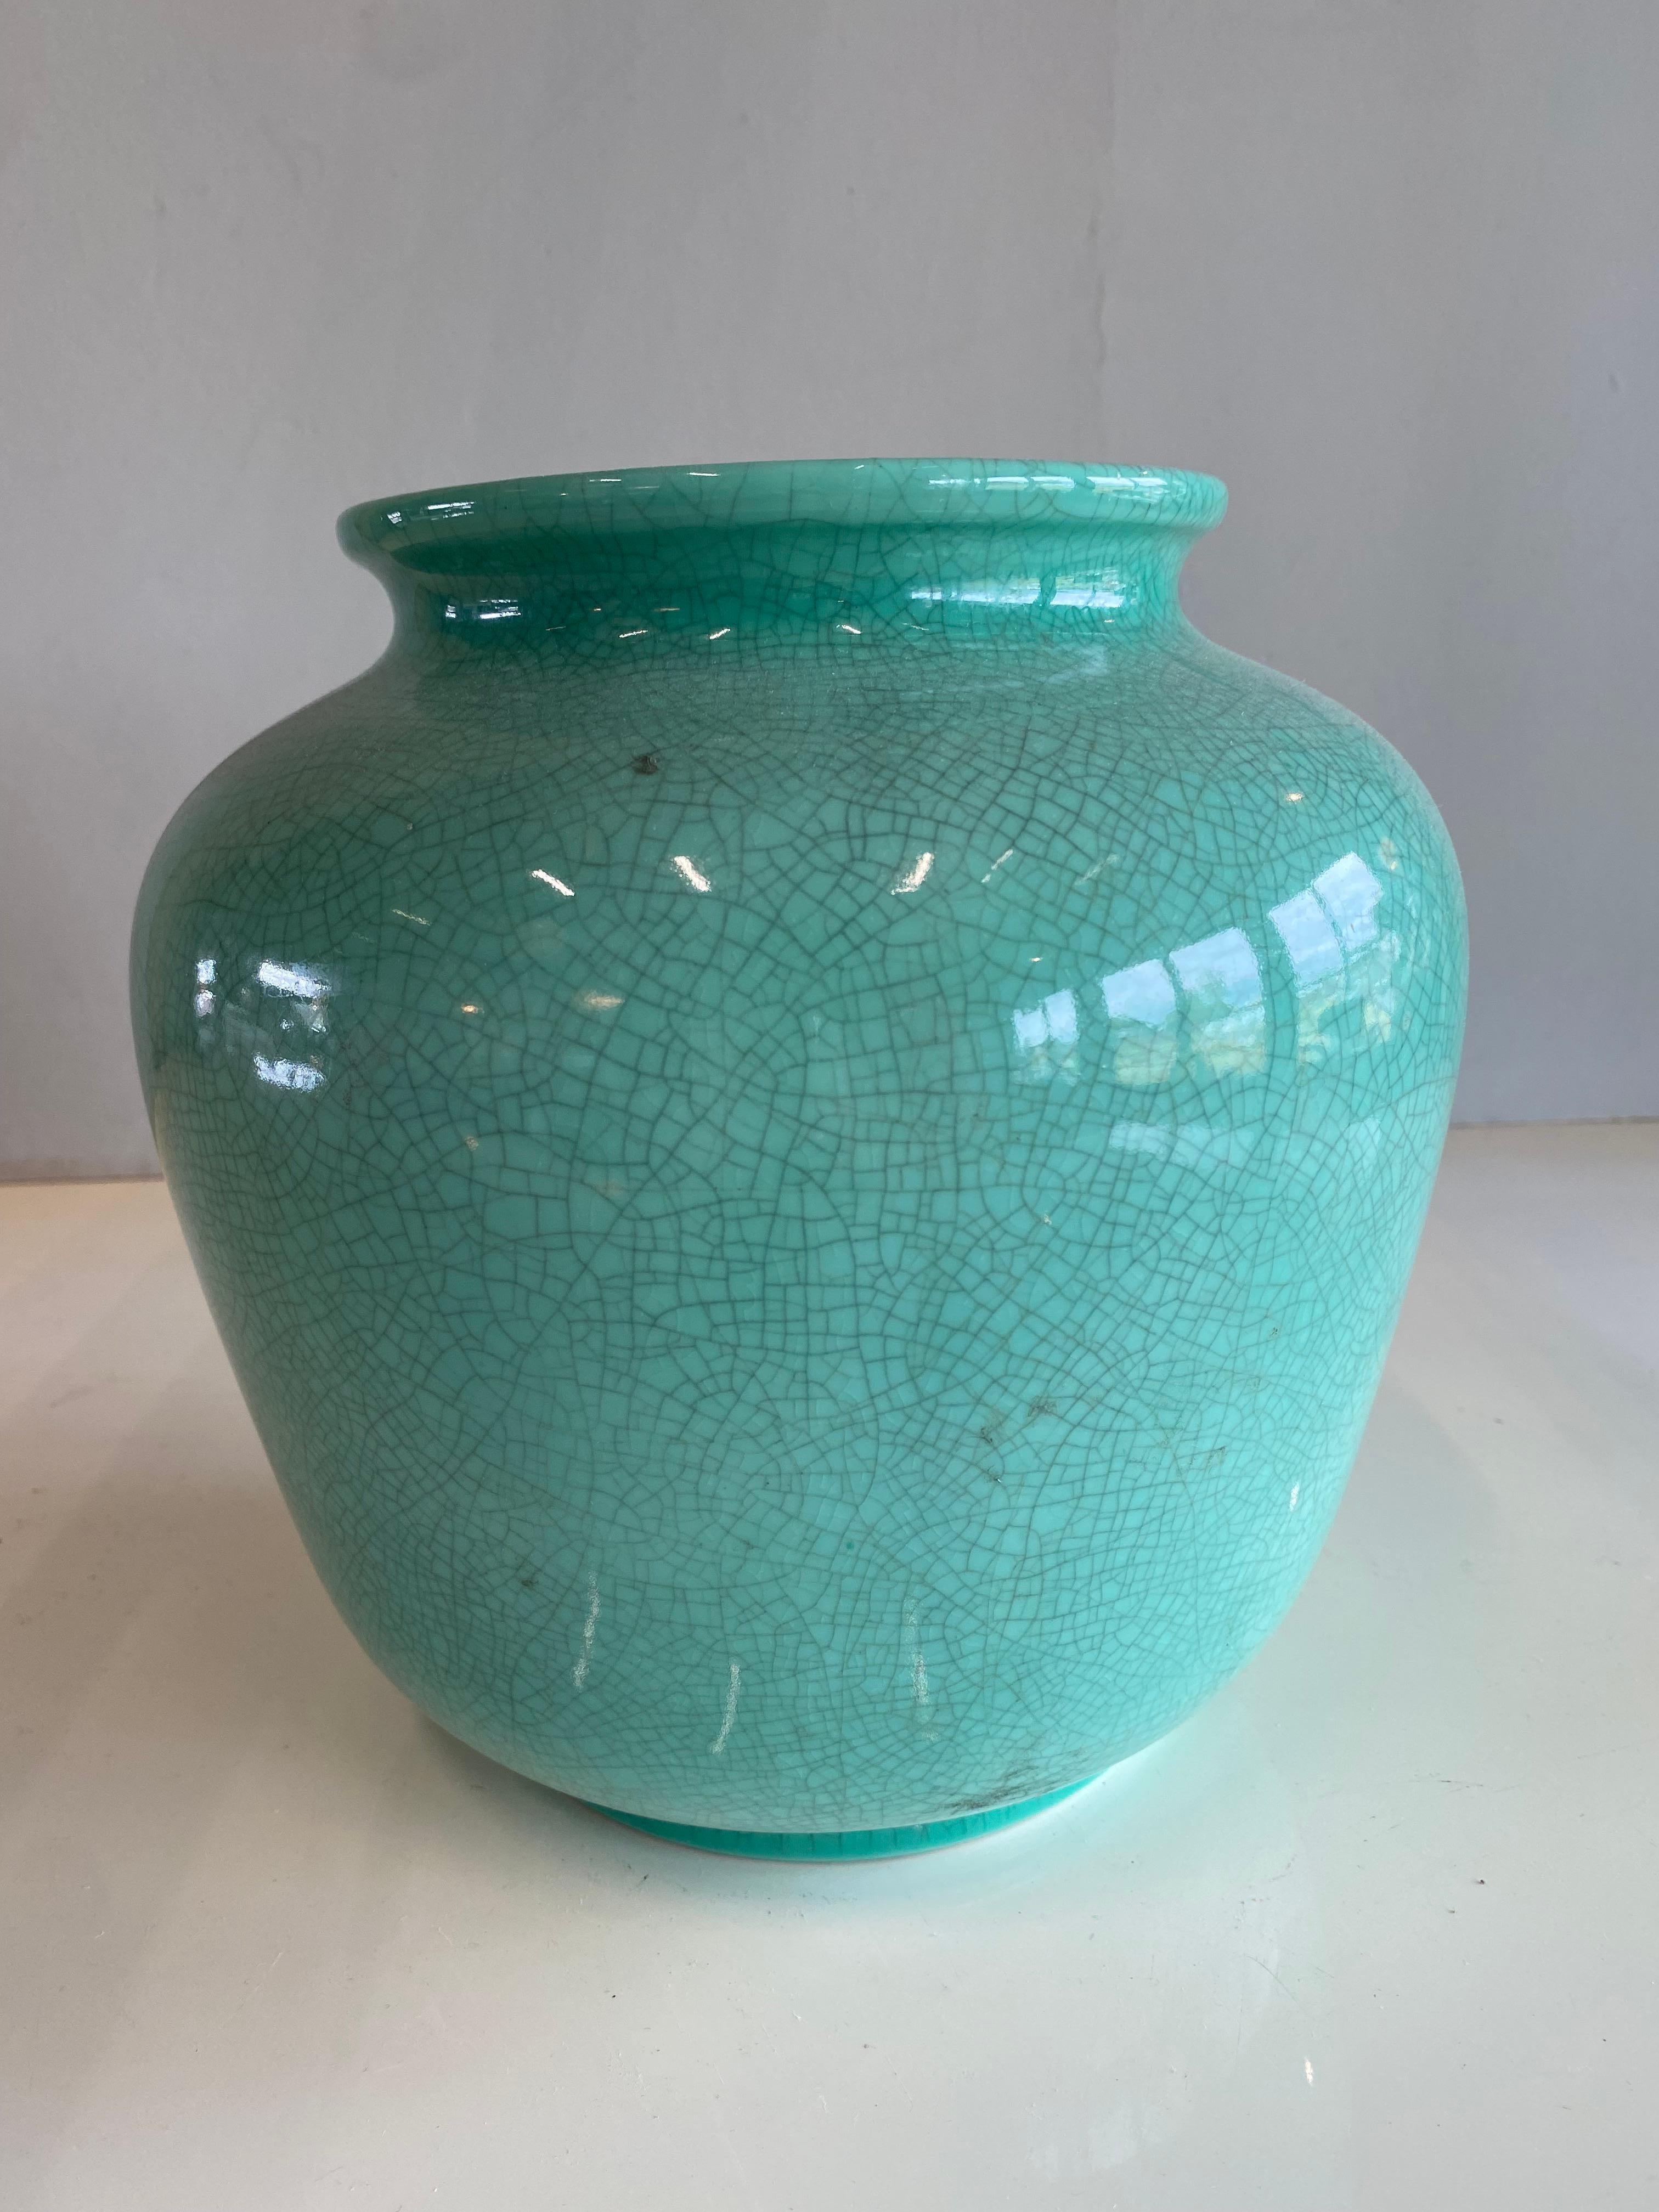 This light green Art Deco vase comes from Germany and is from the 1920s. It is an eye-catcher that brings fresh accents to any interior, even without flowers. The pastel green tone can be combined very well with modern elements, the craquelure makes